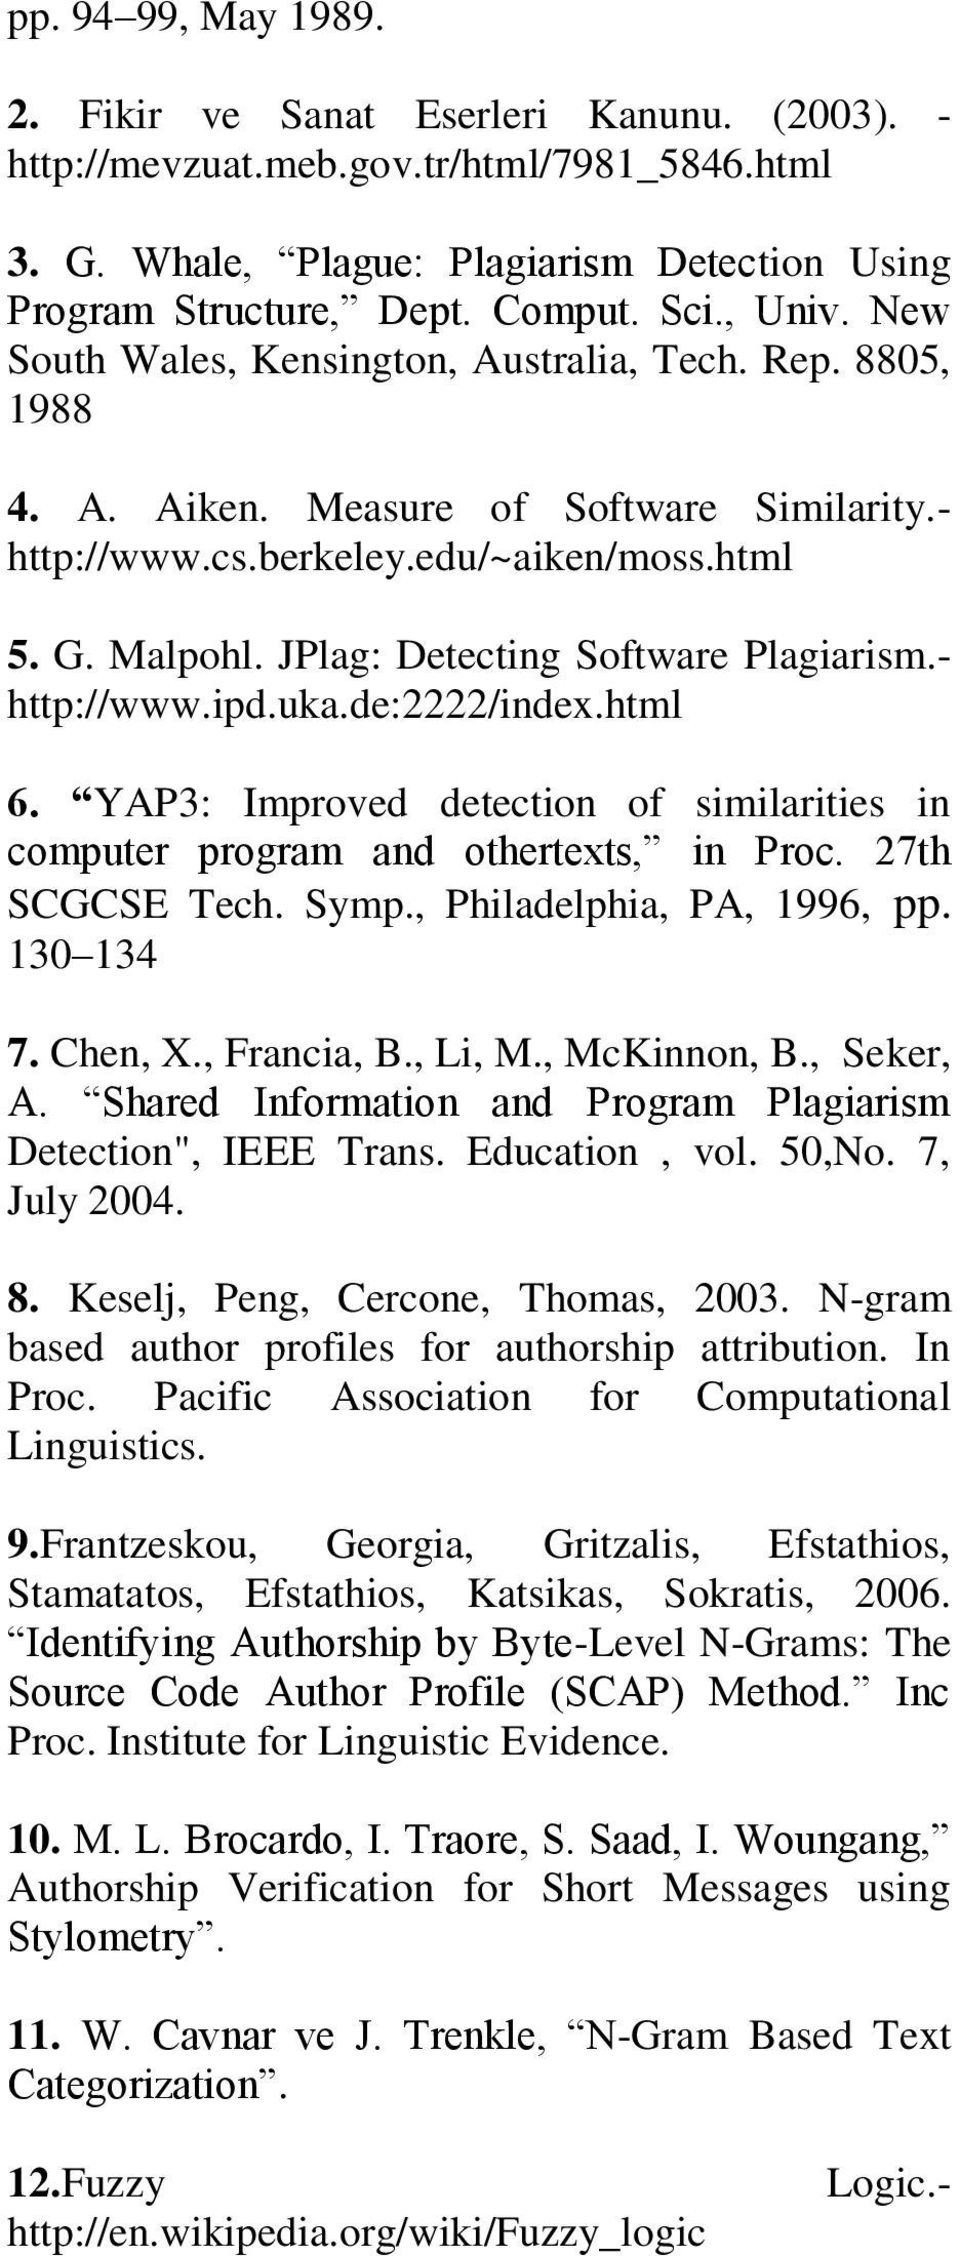 JPlag: Detecting Software Plagiarism.- http://www.ipd.uka.de:2222/index.html 6. YAP3: Improved detection of similarities in computer program and othertexts, in Proc. 27th SCGCSE Tech. Symp.